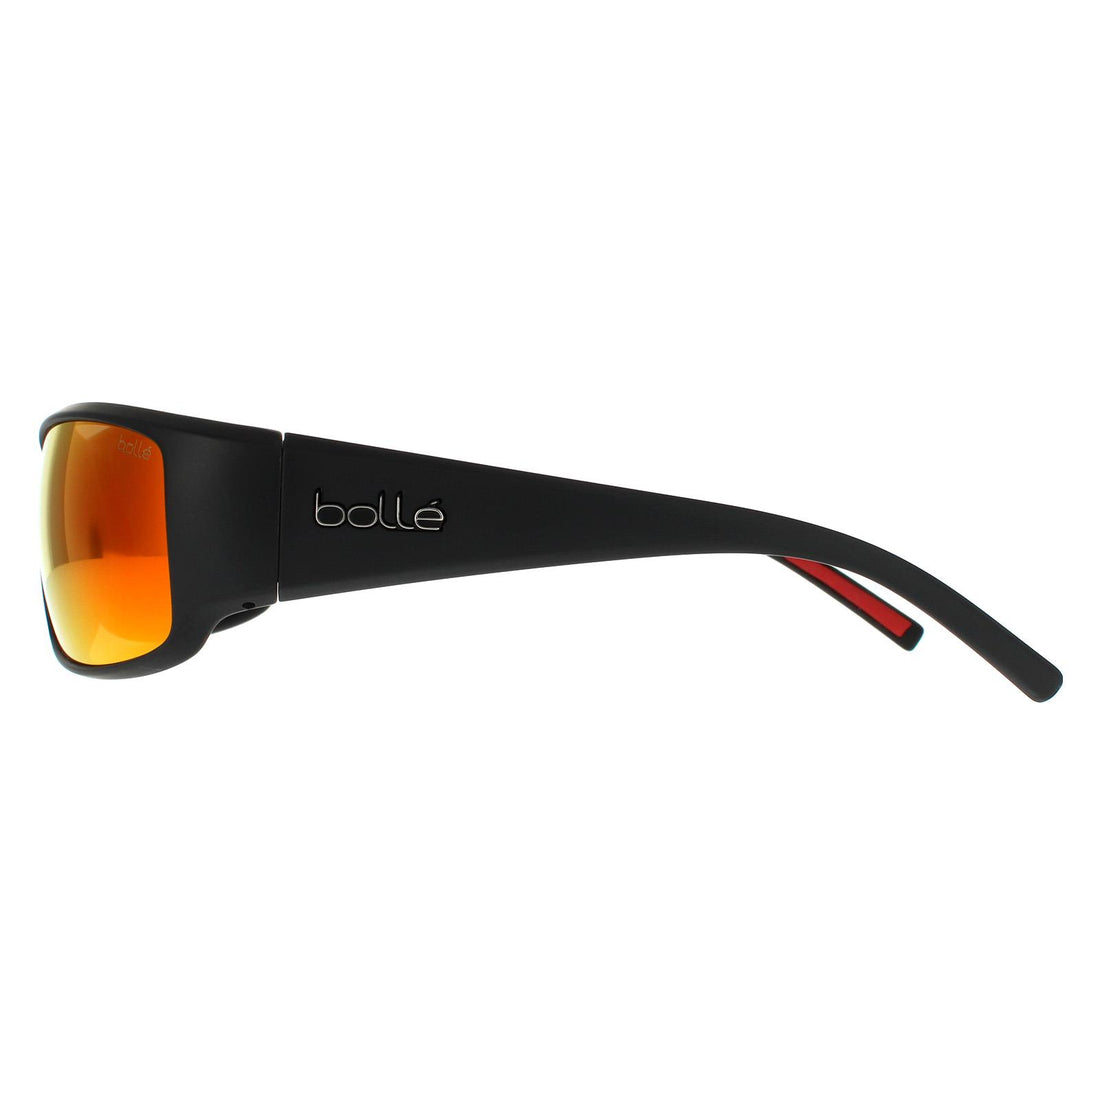 Bolle Sunglasses King 14241 Black Metal Red Brown Fire